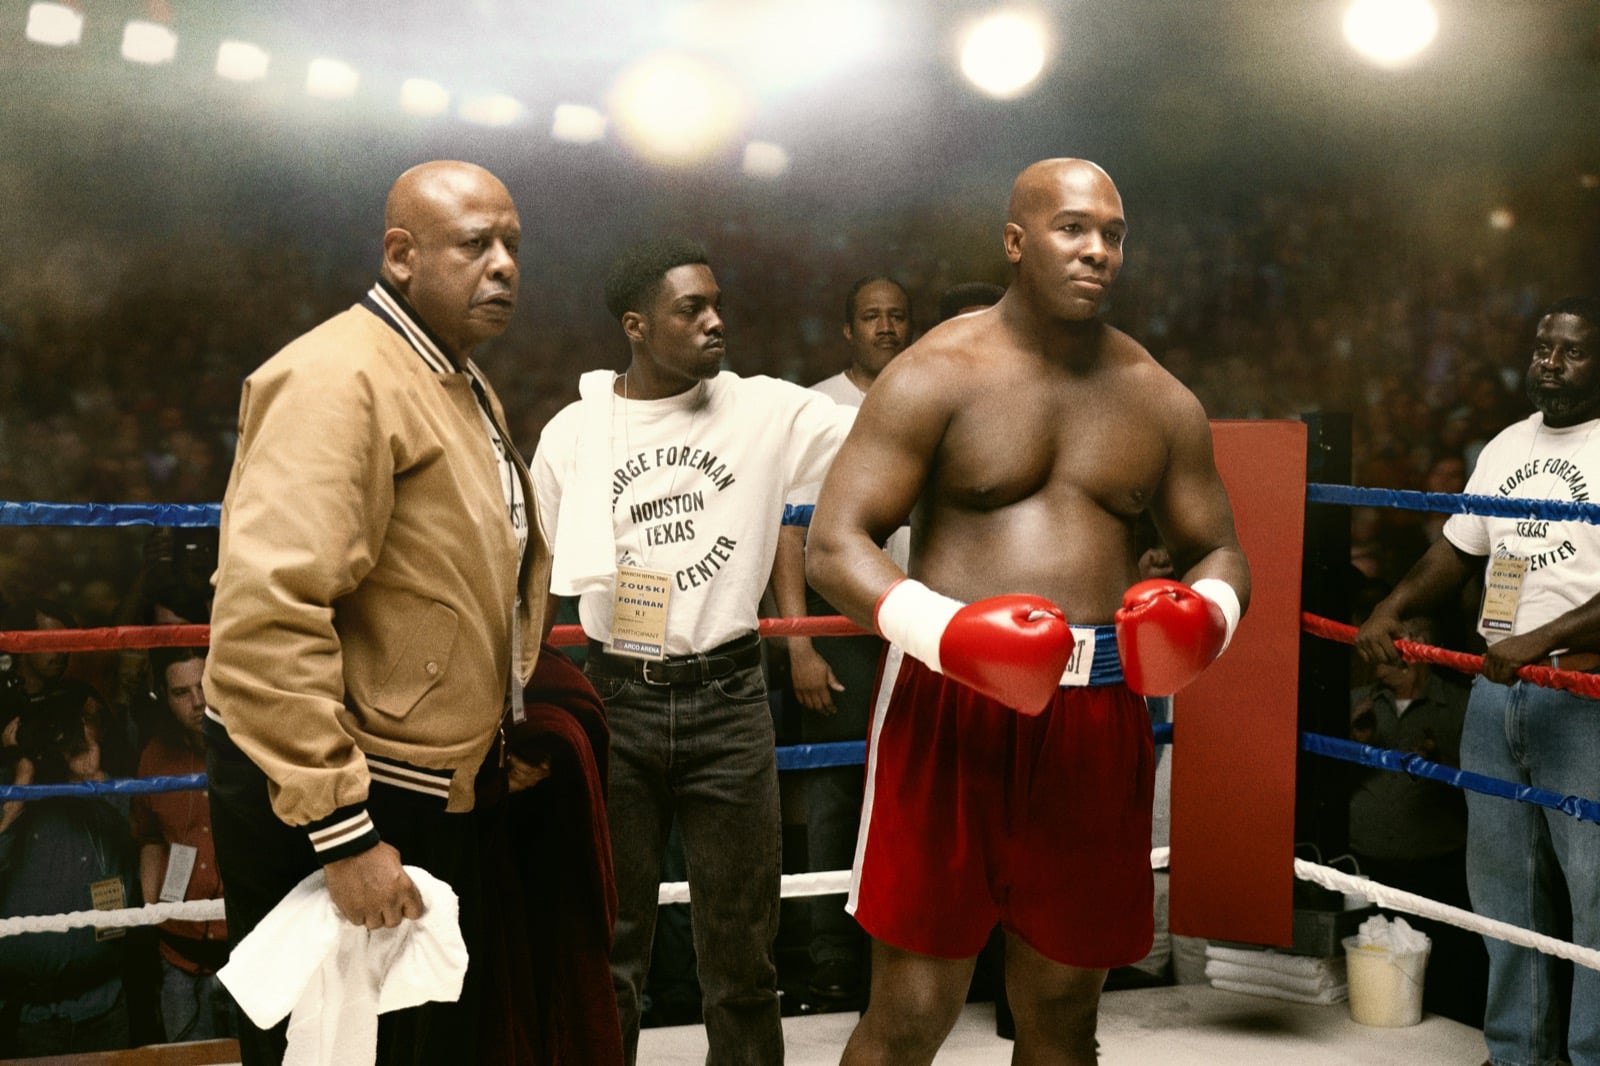 Official Trailer Drops For Foreman Biopic: Big George Foreman: The Miraculous Story Of The Once And Future Heavyweight Champion Of The World”